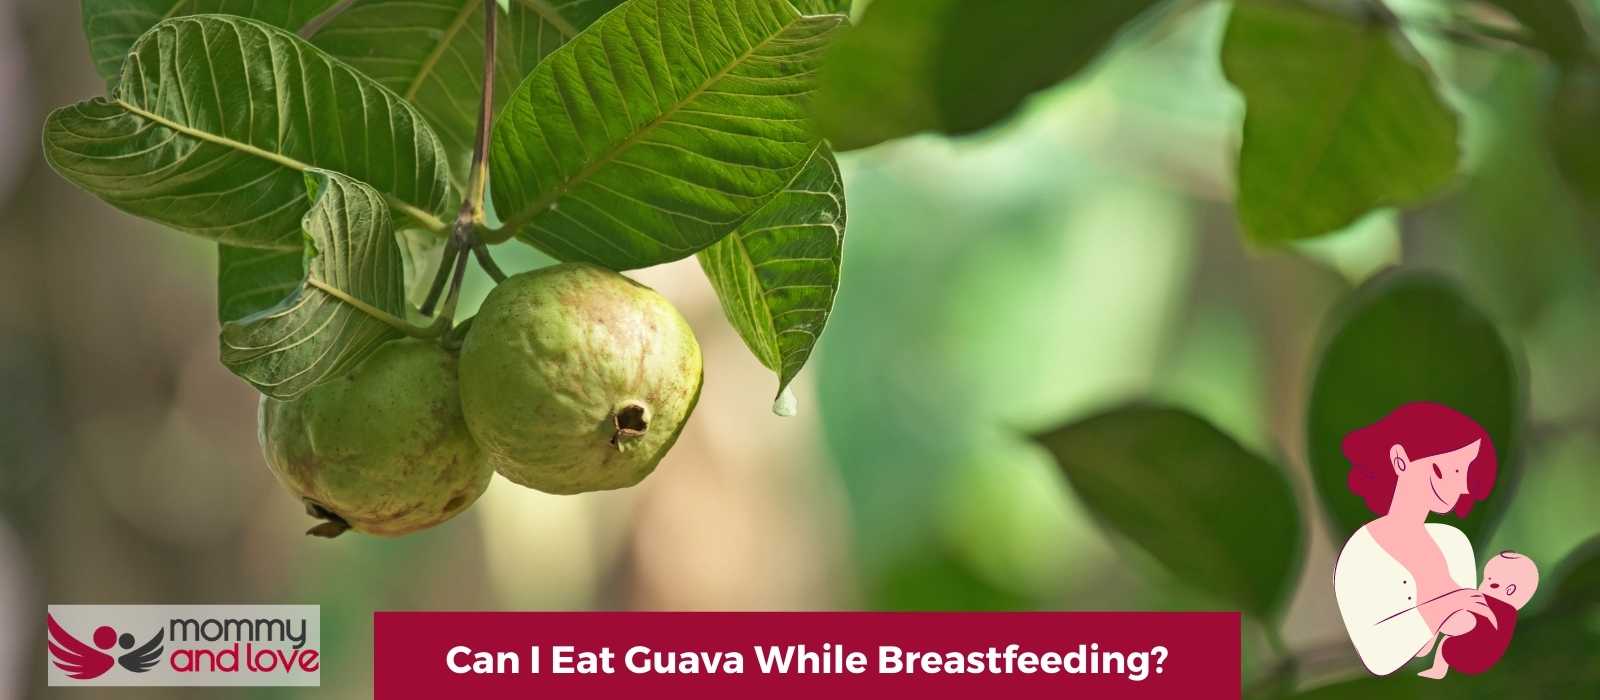 Can I Eat Guava While Breastfeeding? - Raising Families Naturally